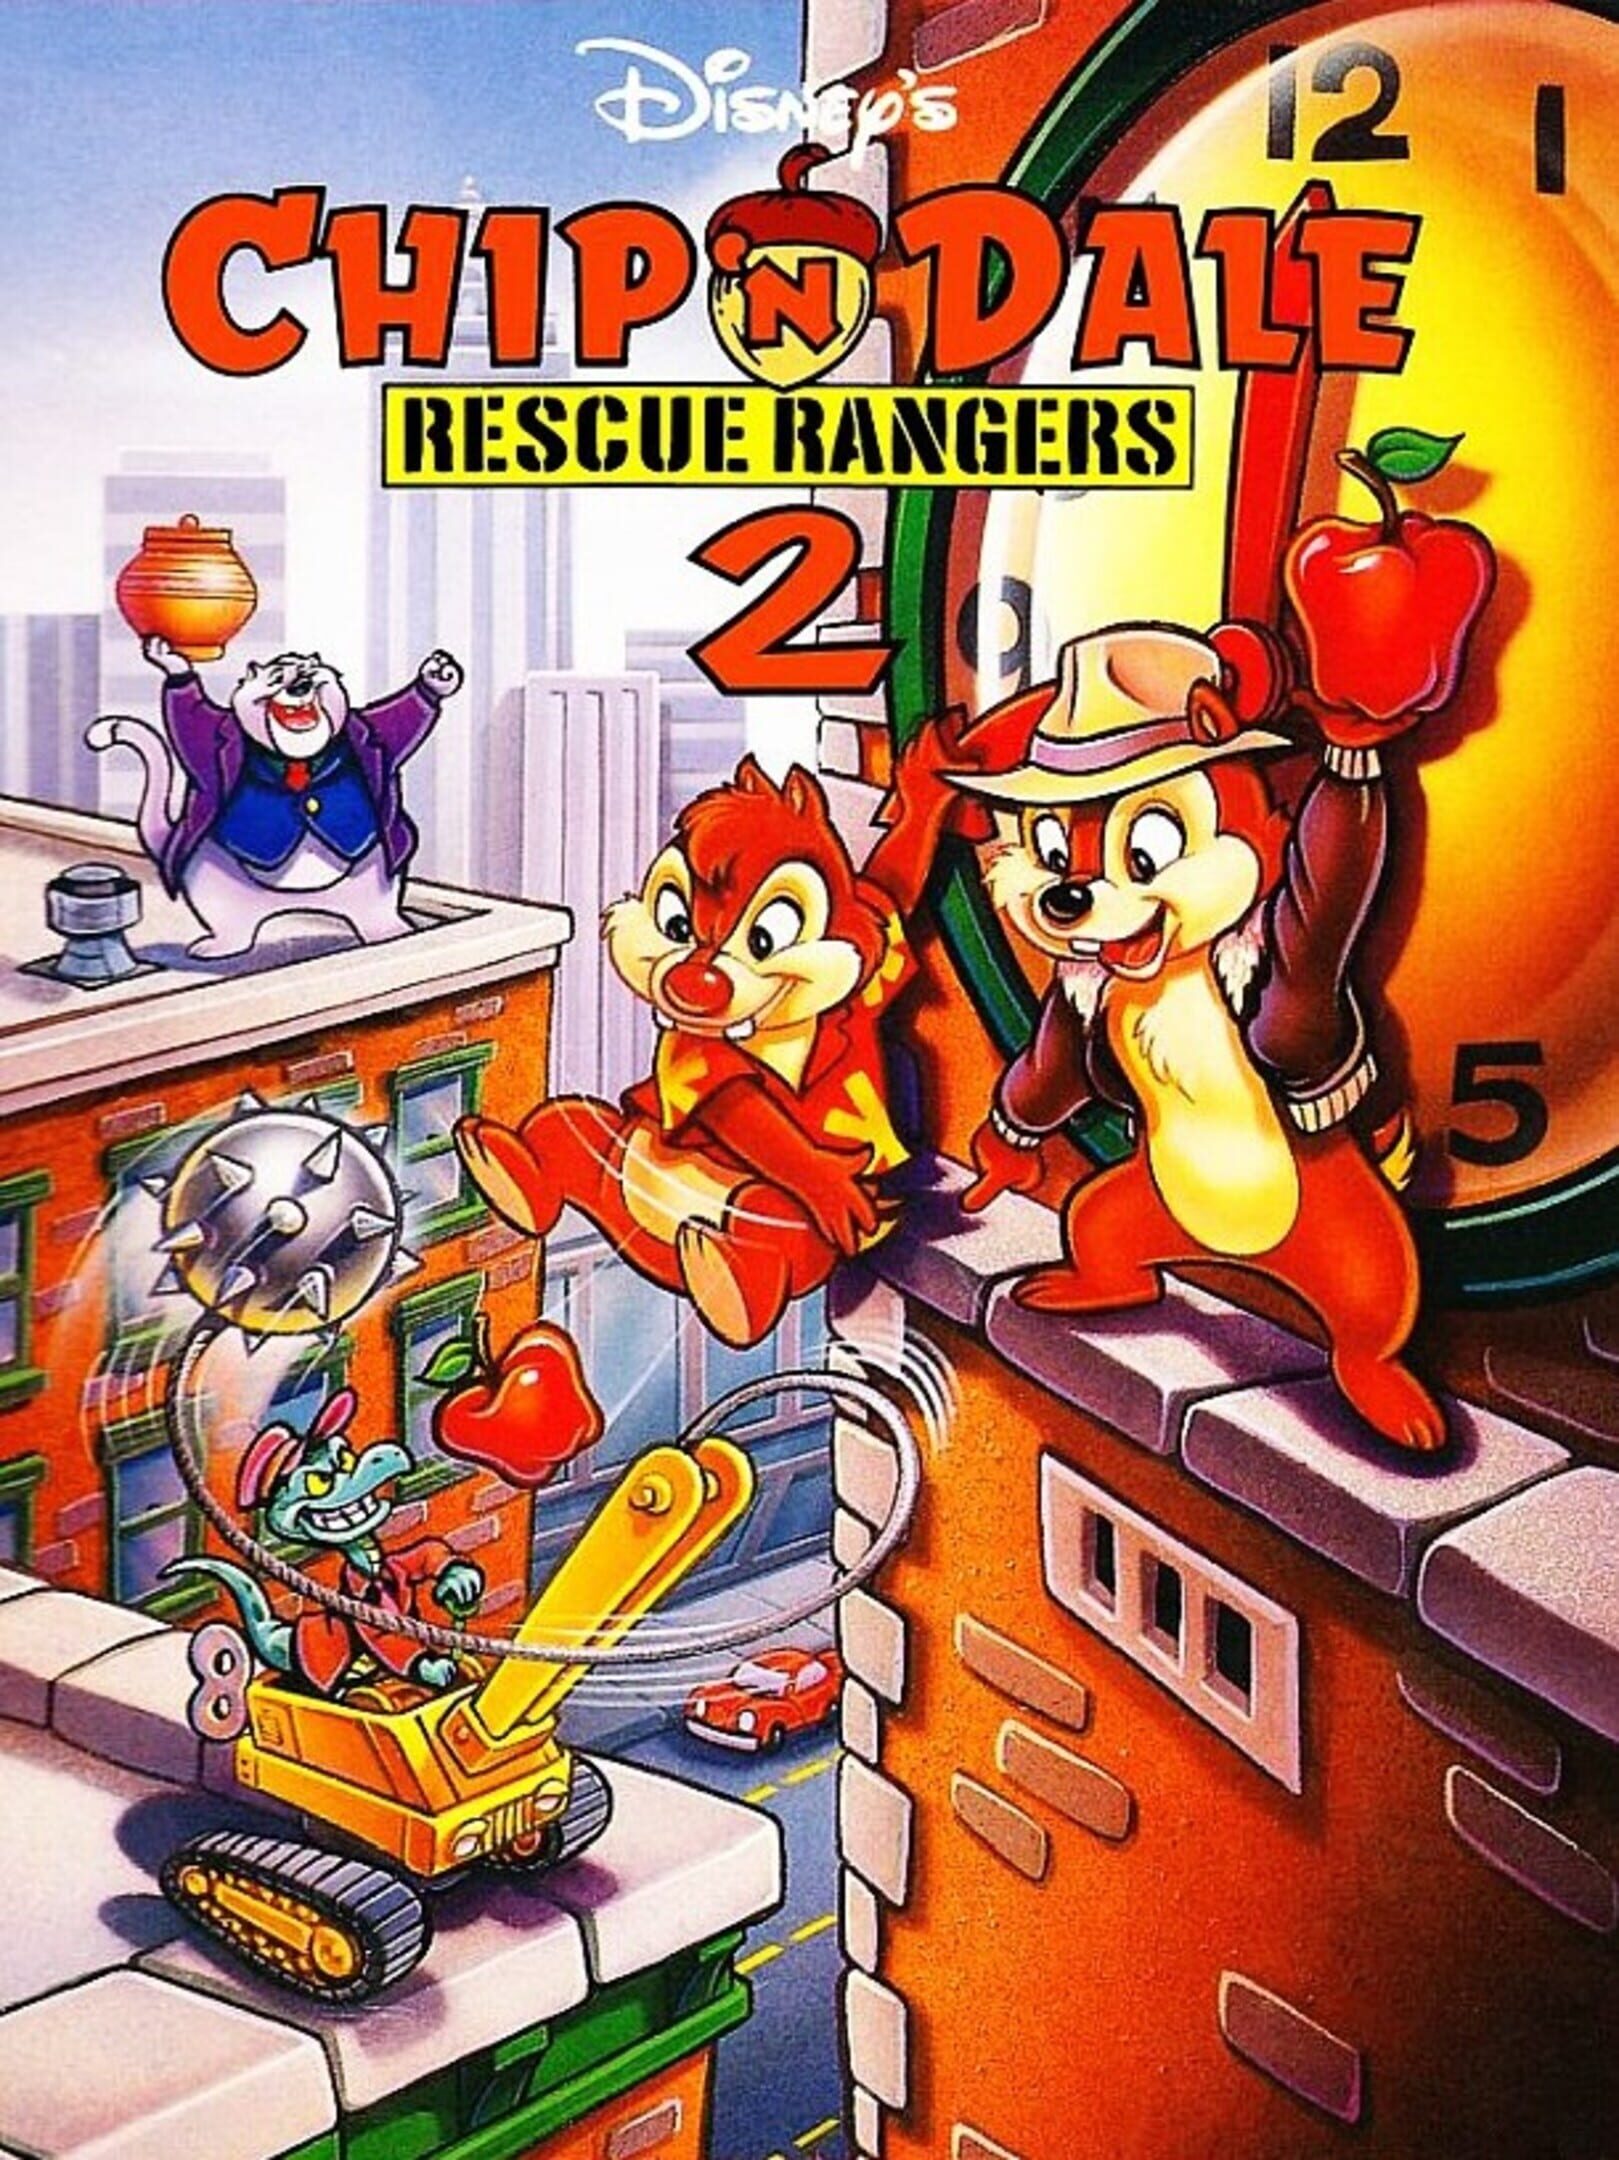 Chip and dale 2. Чип и Дейл игра. Чип и Дейл 2 NES. Chip n Dale Rescue Rangers 2022. Chip 'n Dale Rescue Rangers игра.